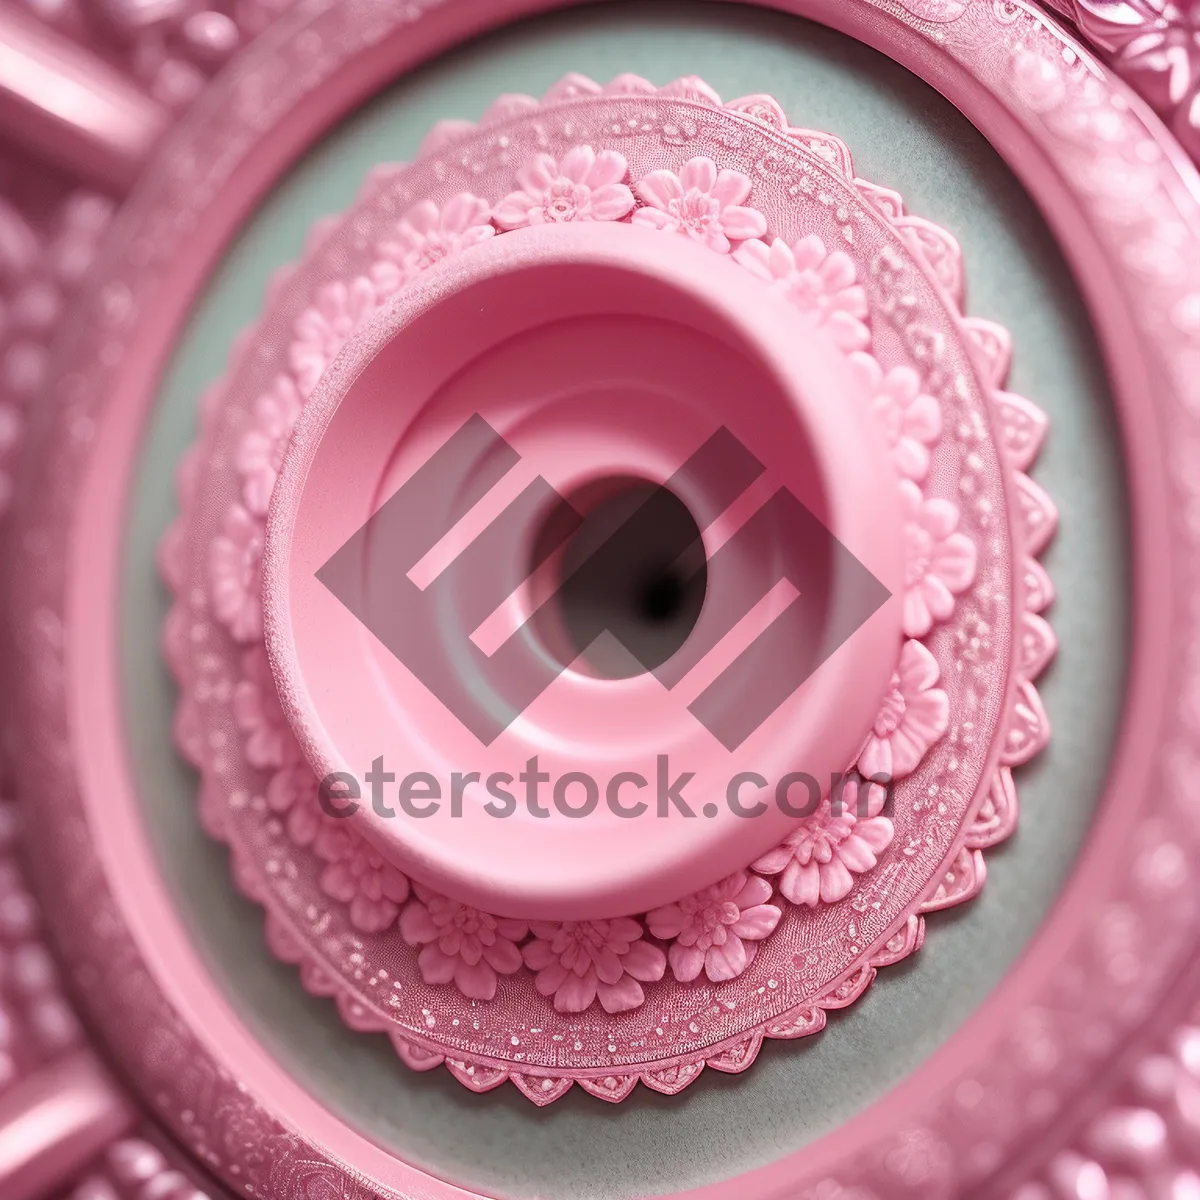 Picture of Coil Structure: Rose Close-Up Floral Beauty.